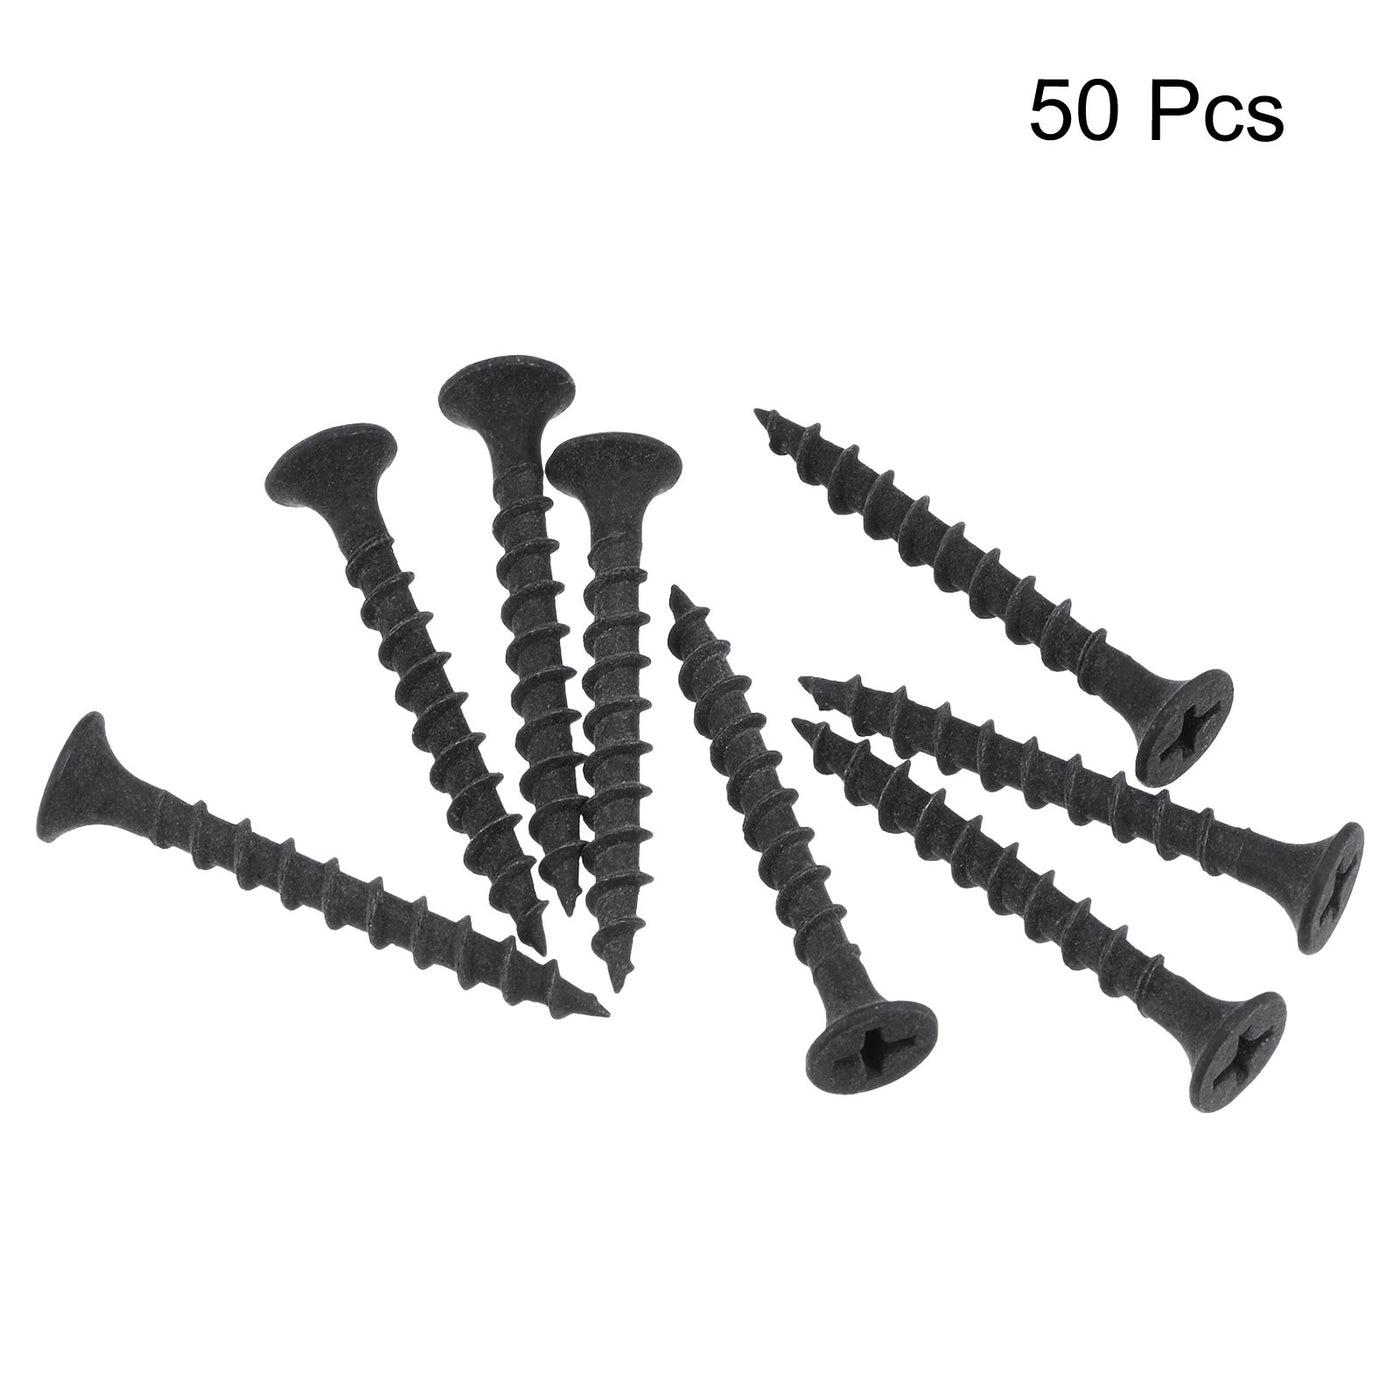 uxcell Uxcell 50pcs #8 x 1 3/8-Inch Wood Screws Carbon Steel Phillips Self Tapping Black